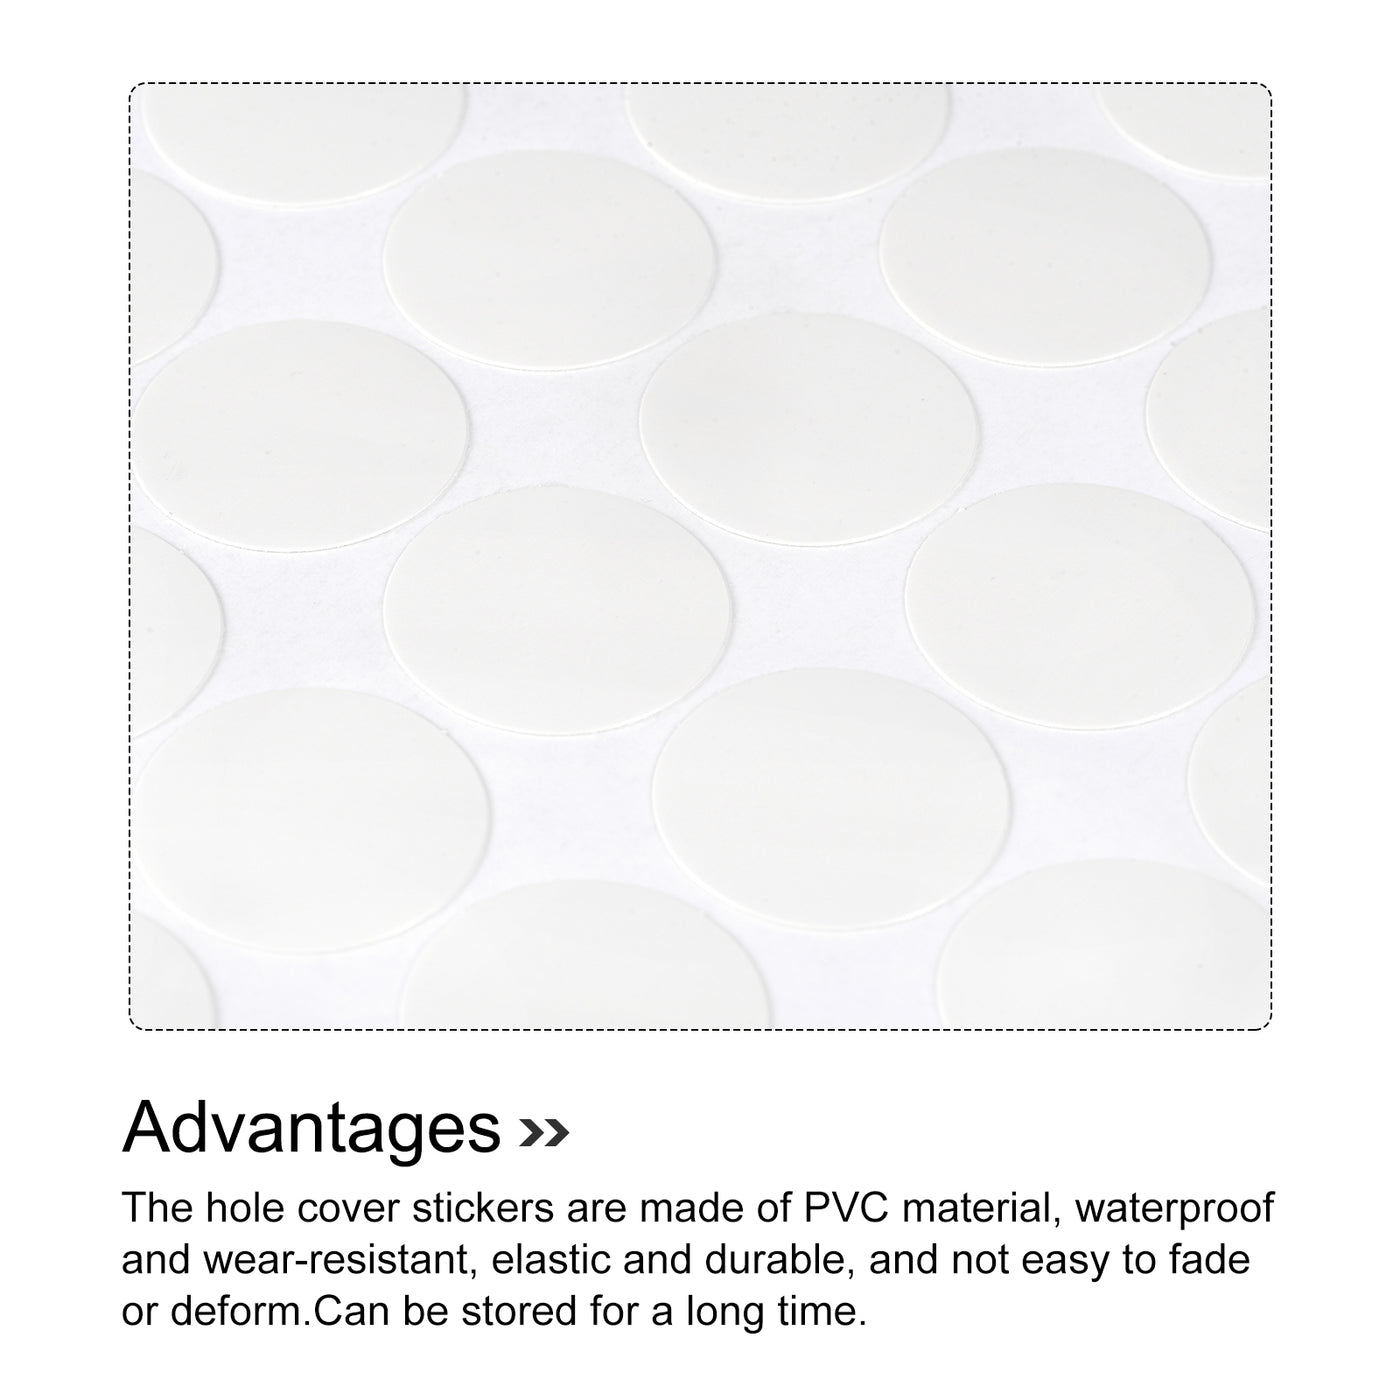 uxcell Uxcell Screw Hole Cover Stickers, 15mm Dia PVC Self Adhesive Covers Caps for Wood Furniture Cabinet Shelf Wardrobe, White 6 Sheet/576pcs